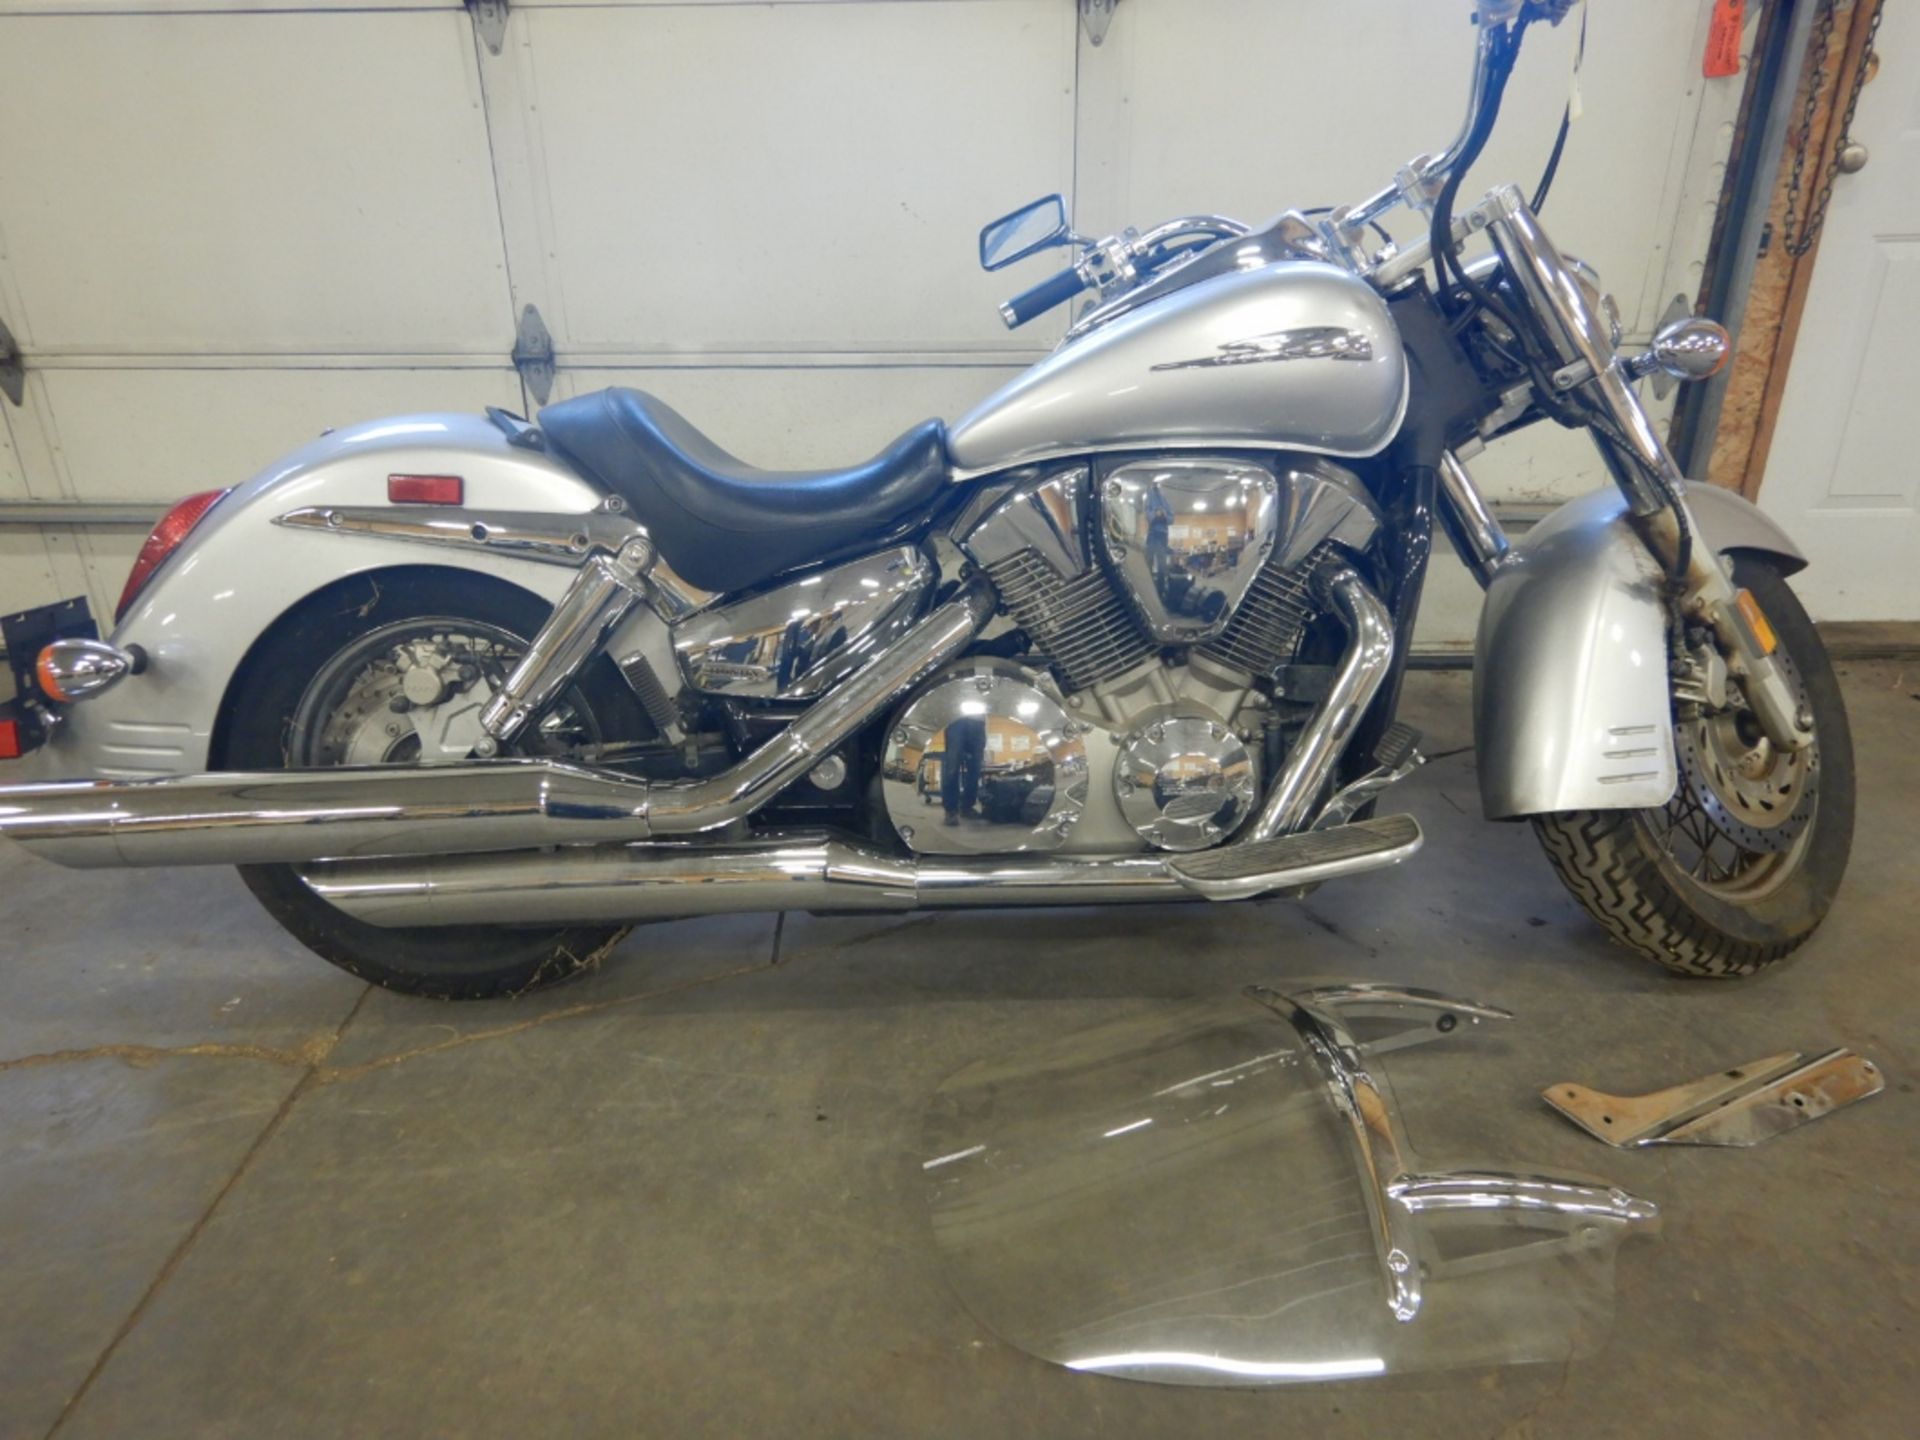 2006 HONDA VTX1300S6 MOTORCYCLE W/ WINDSHIELD INCLUDED (INSTALLATION REQUIRED) 5067 KM SHOWING - Image 4 of 12